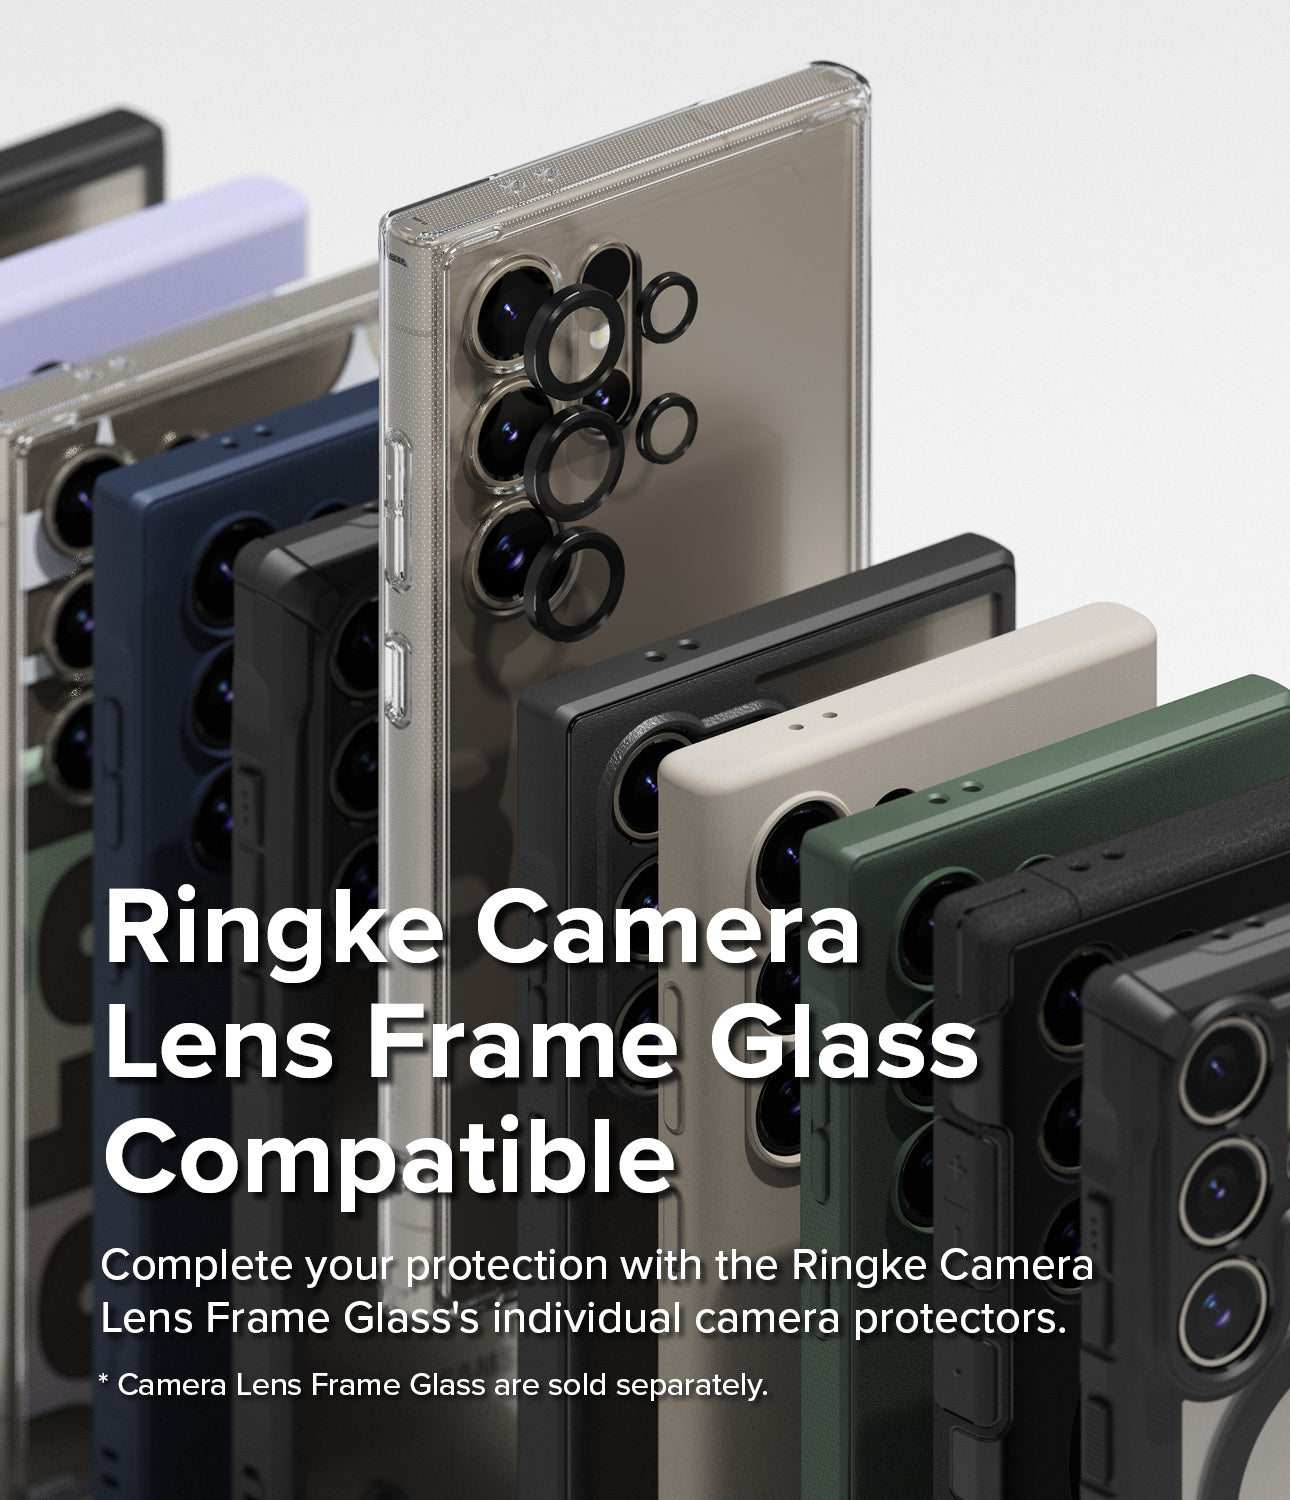 Galaxy S24 Ultra Case | Onyx Design - Moon - Ringke Camera Lens Frame Glass Compatible. Complete your protection with the Ringke Camera Lens Frame Glass' individual camera protectors.